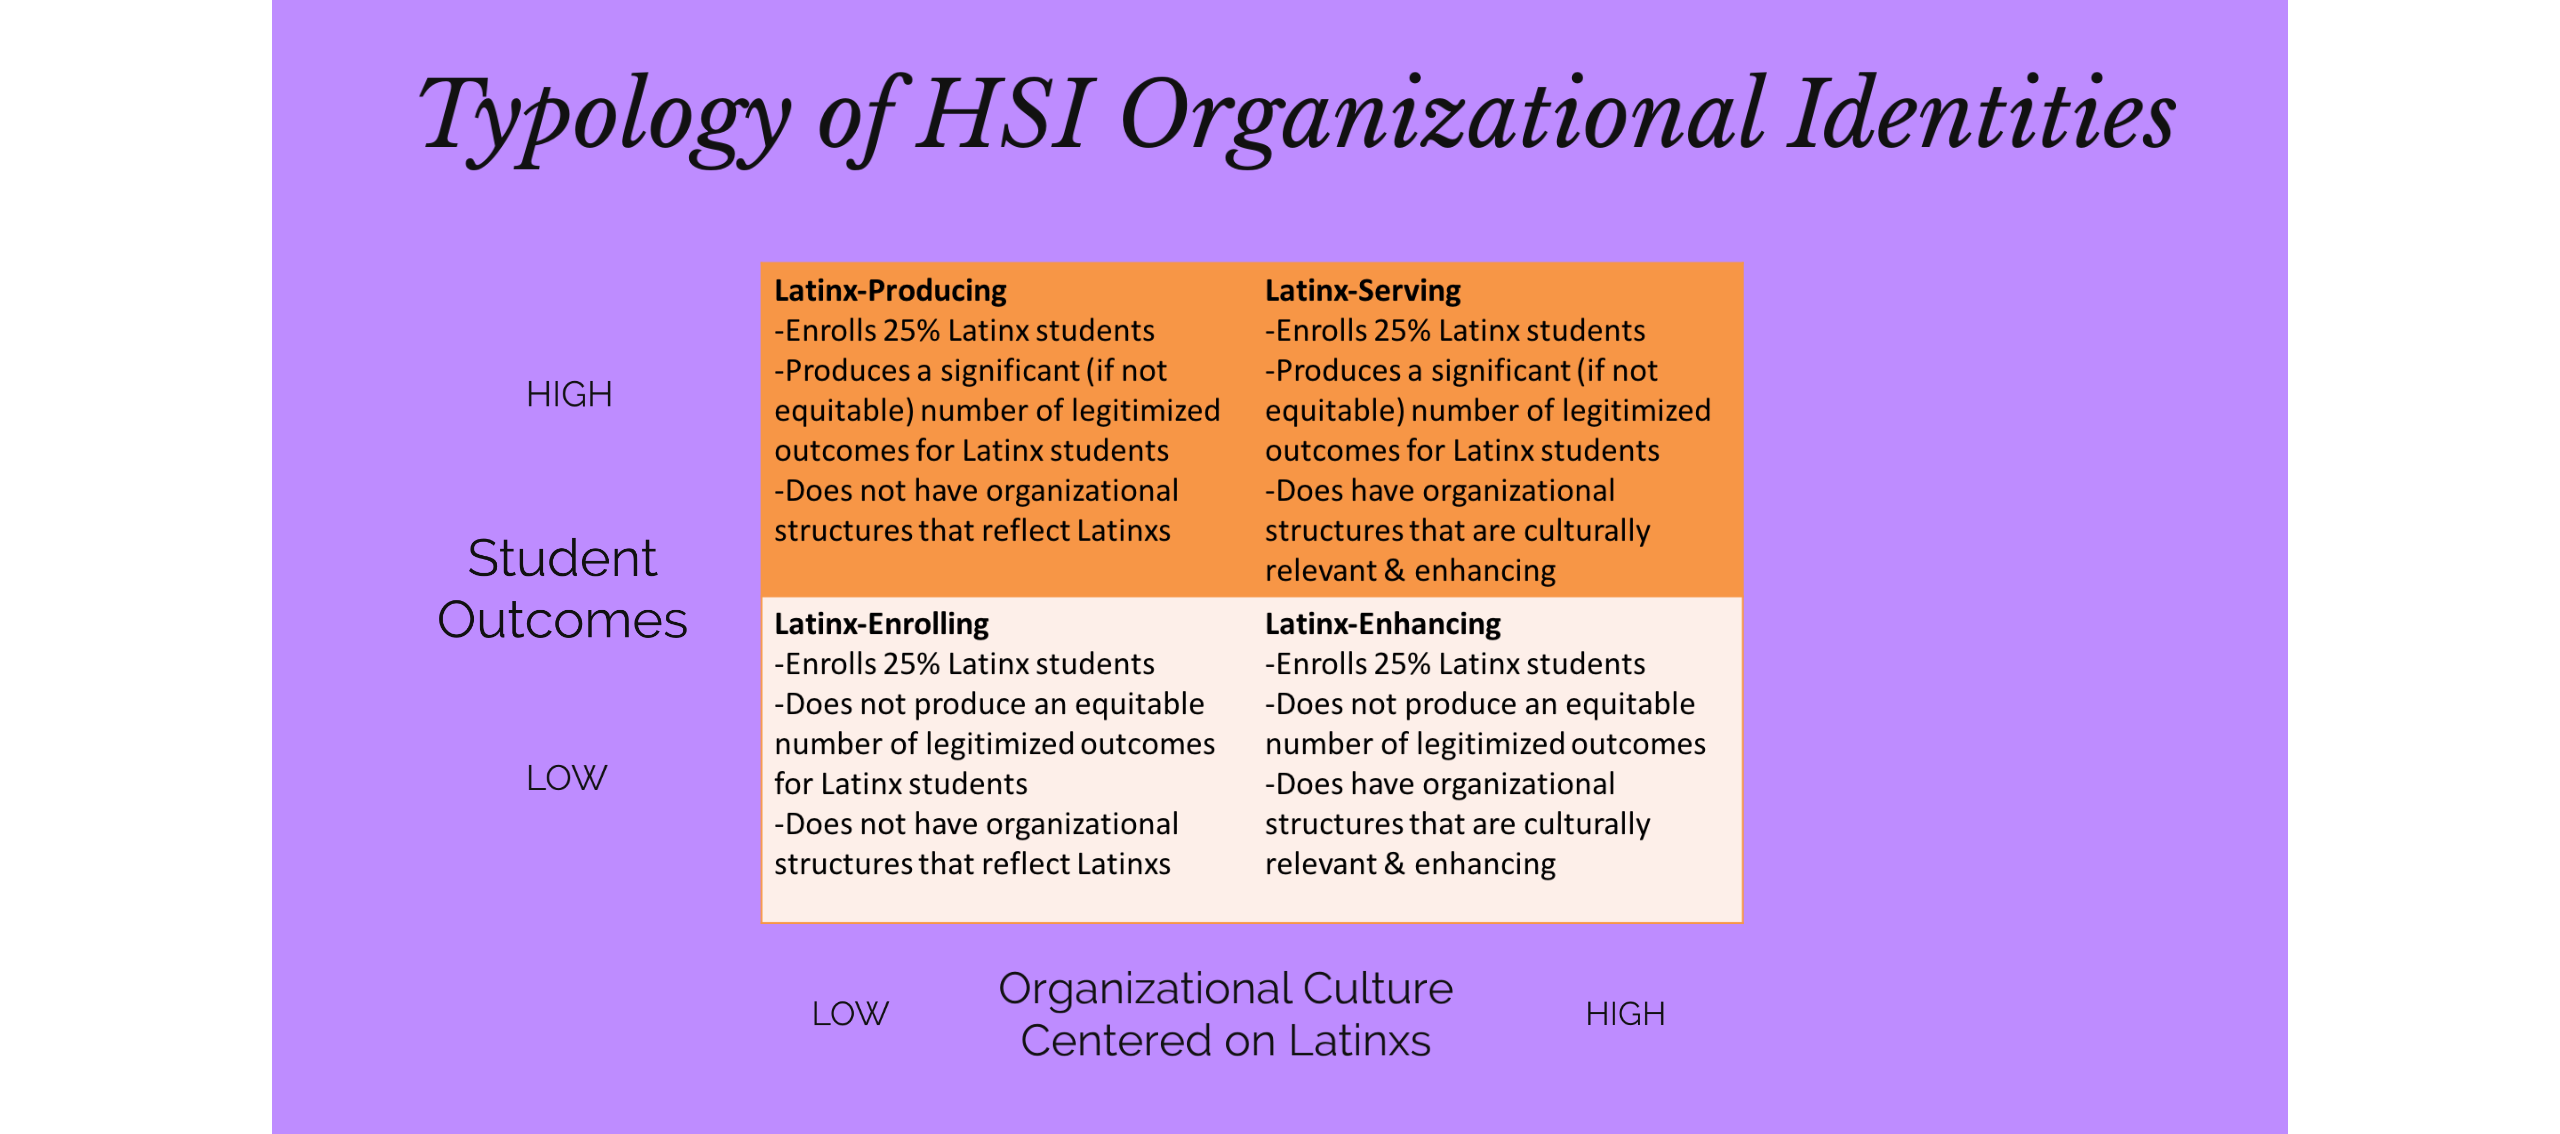 Typology of HSI Organizational Identities.
Latinx-producing
-Enrolls 25% Latinx Students
-Produces a significant (if not equitable) number of legitimized outcomes for Latinx students
-Does not have organizational structures that reflect Latinxs

Latin-Enrolling
-Enrolls 25% Latinx students
-Does not produce an equitable number of legitimized outcomes for Latinx students
-Does not have organizational structures that reflect Latinxs

Latinx-Serving
-Enrolls 25% Latinx students
-Produces a significant (if not equitable) number of legitimized outcomes for Latinx students
-Does have organizational structures that are culturally relevant and enhancing

Latinx-Enhancing
-Enrolls 25% Latinx students
-Does not produce an equitable number of legitimized outcomes for Latinx students
-Does have organizational structures that are culturally relevant and enhancing